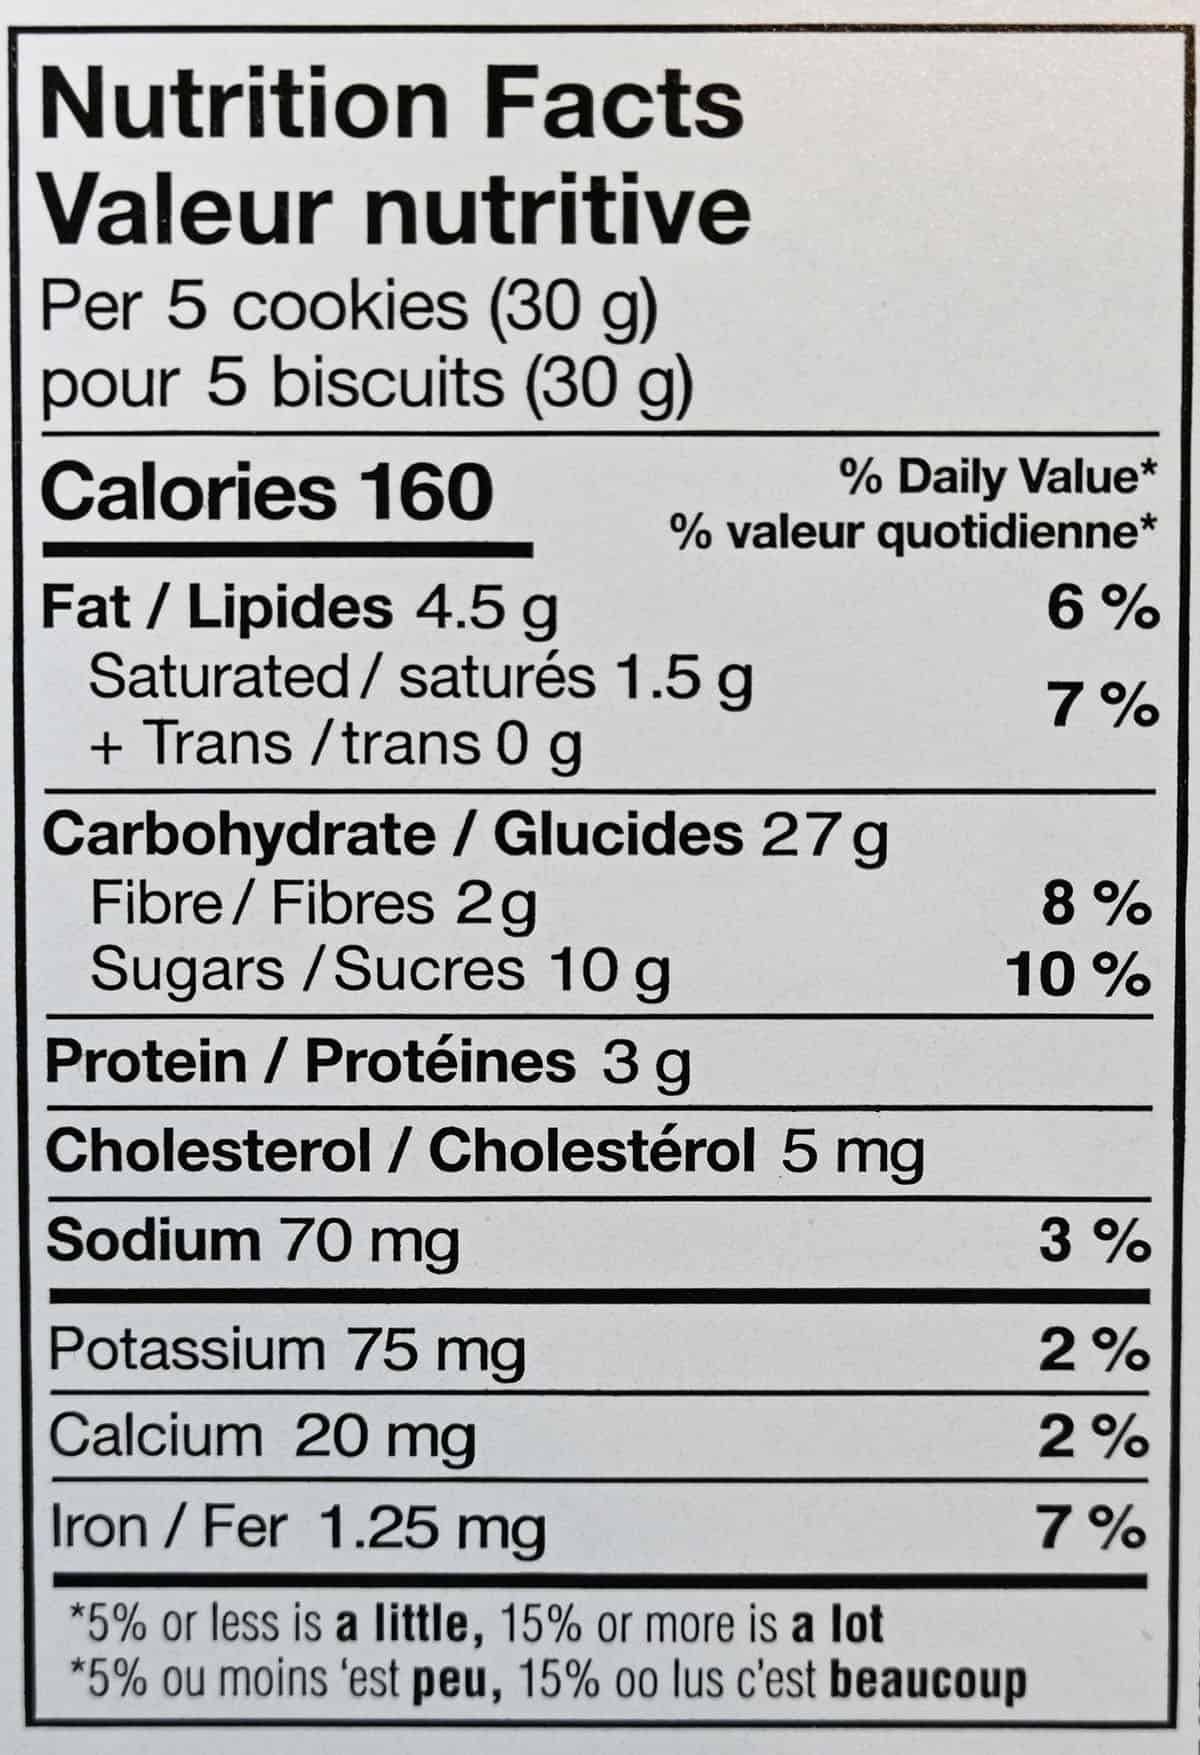 Nutrition facts label for the gingerbread cookies.